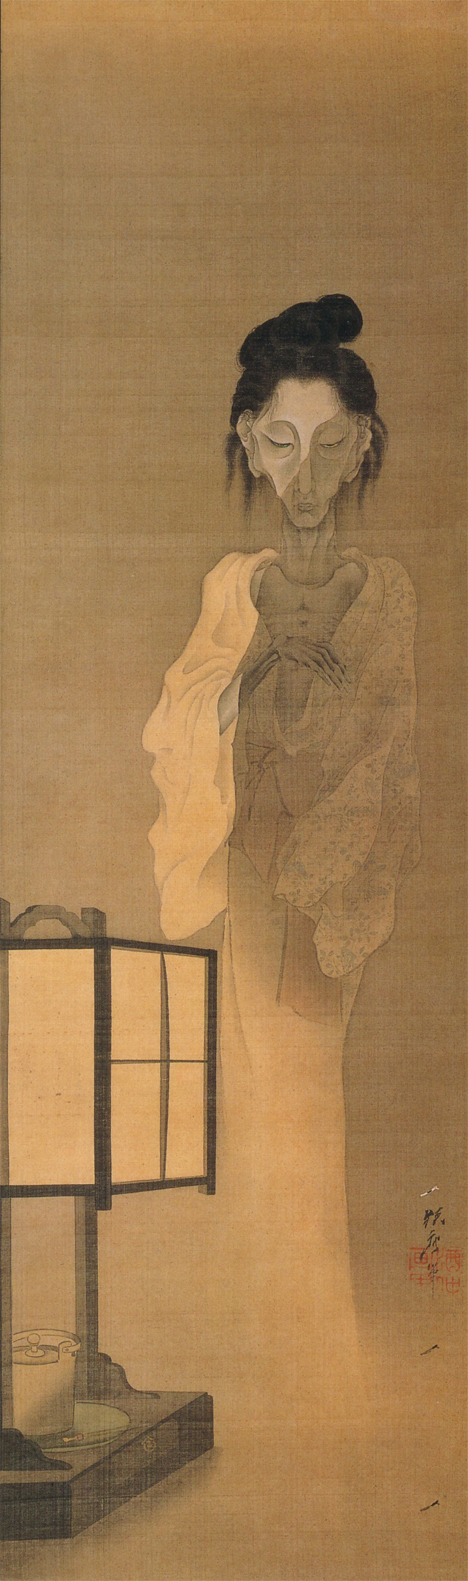 Ghost painting by Kyosai -- 